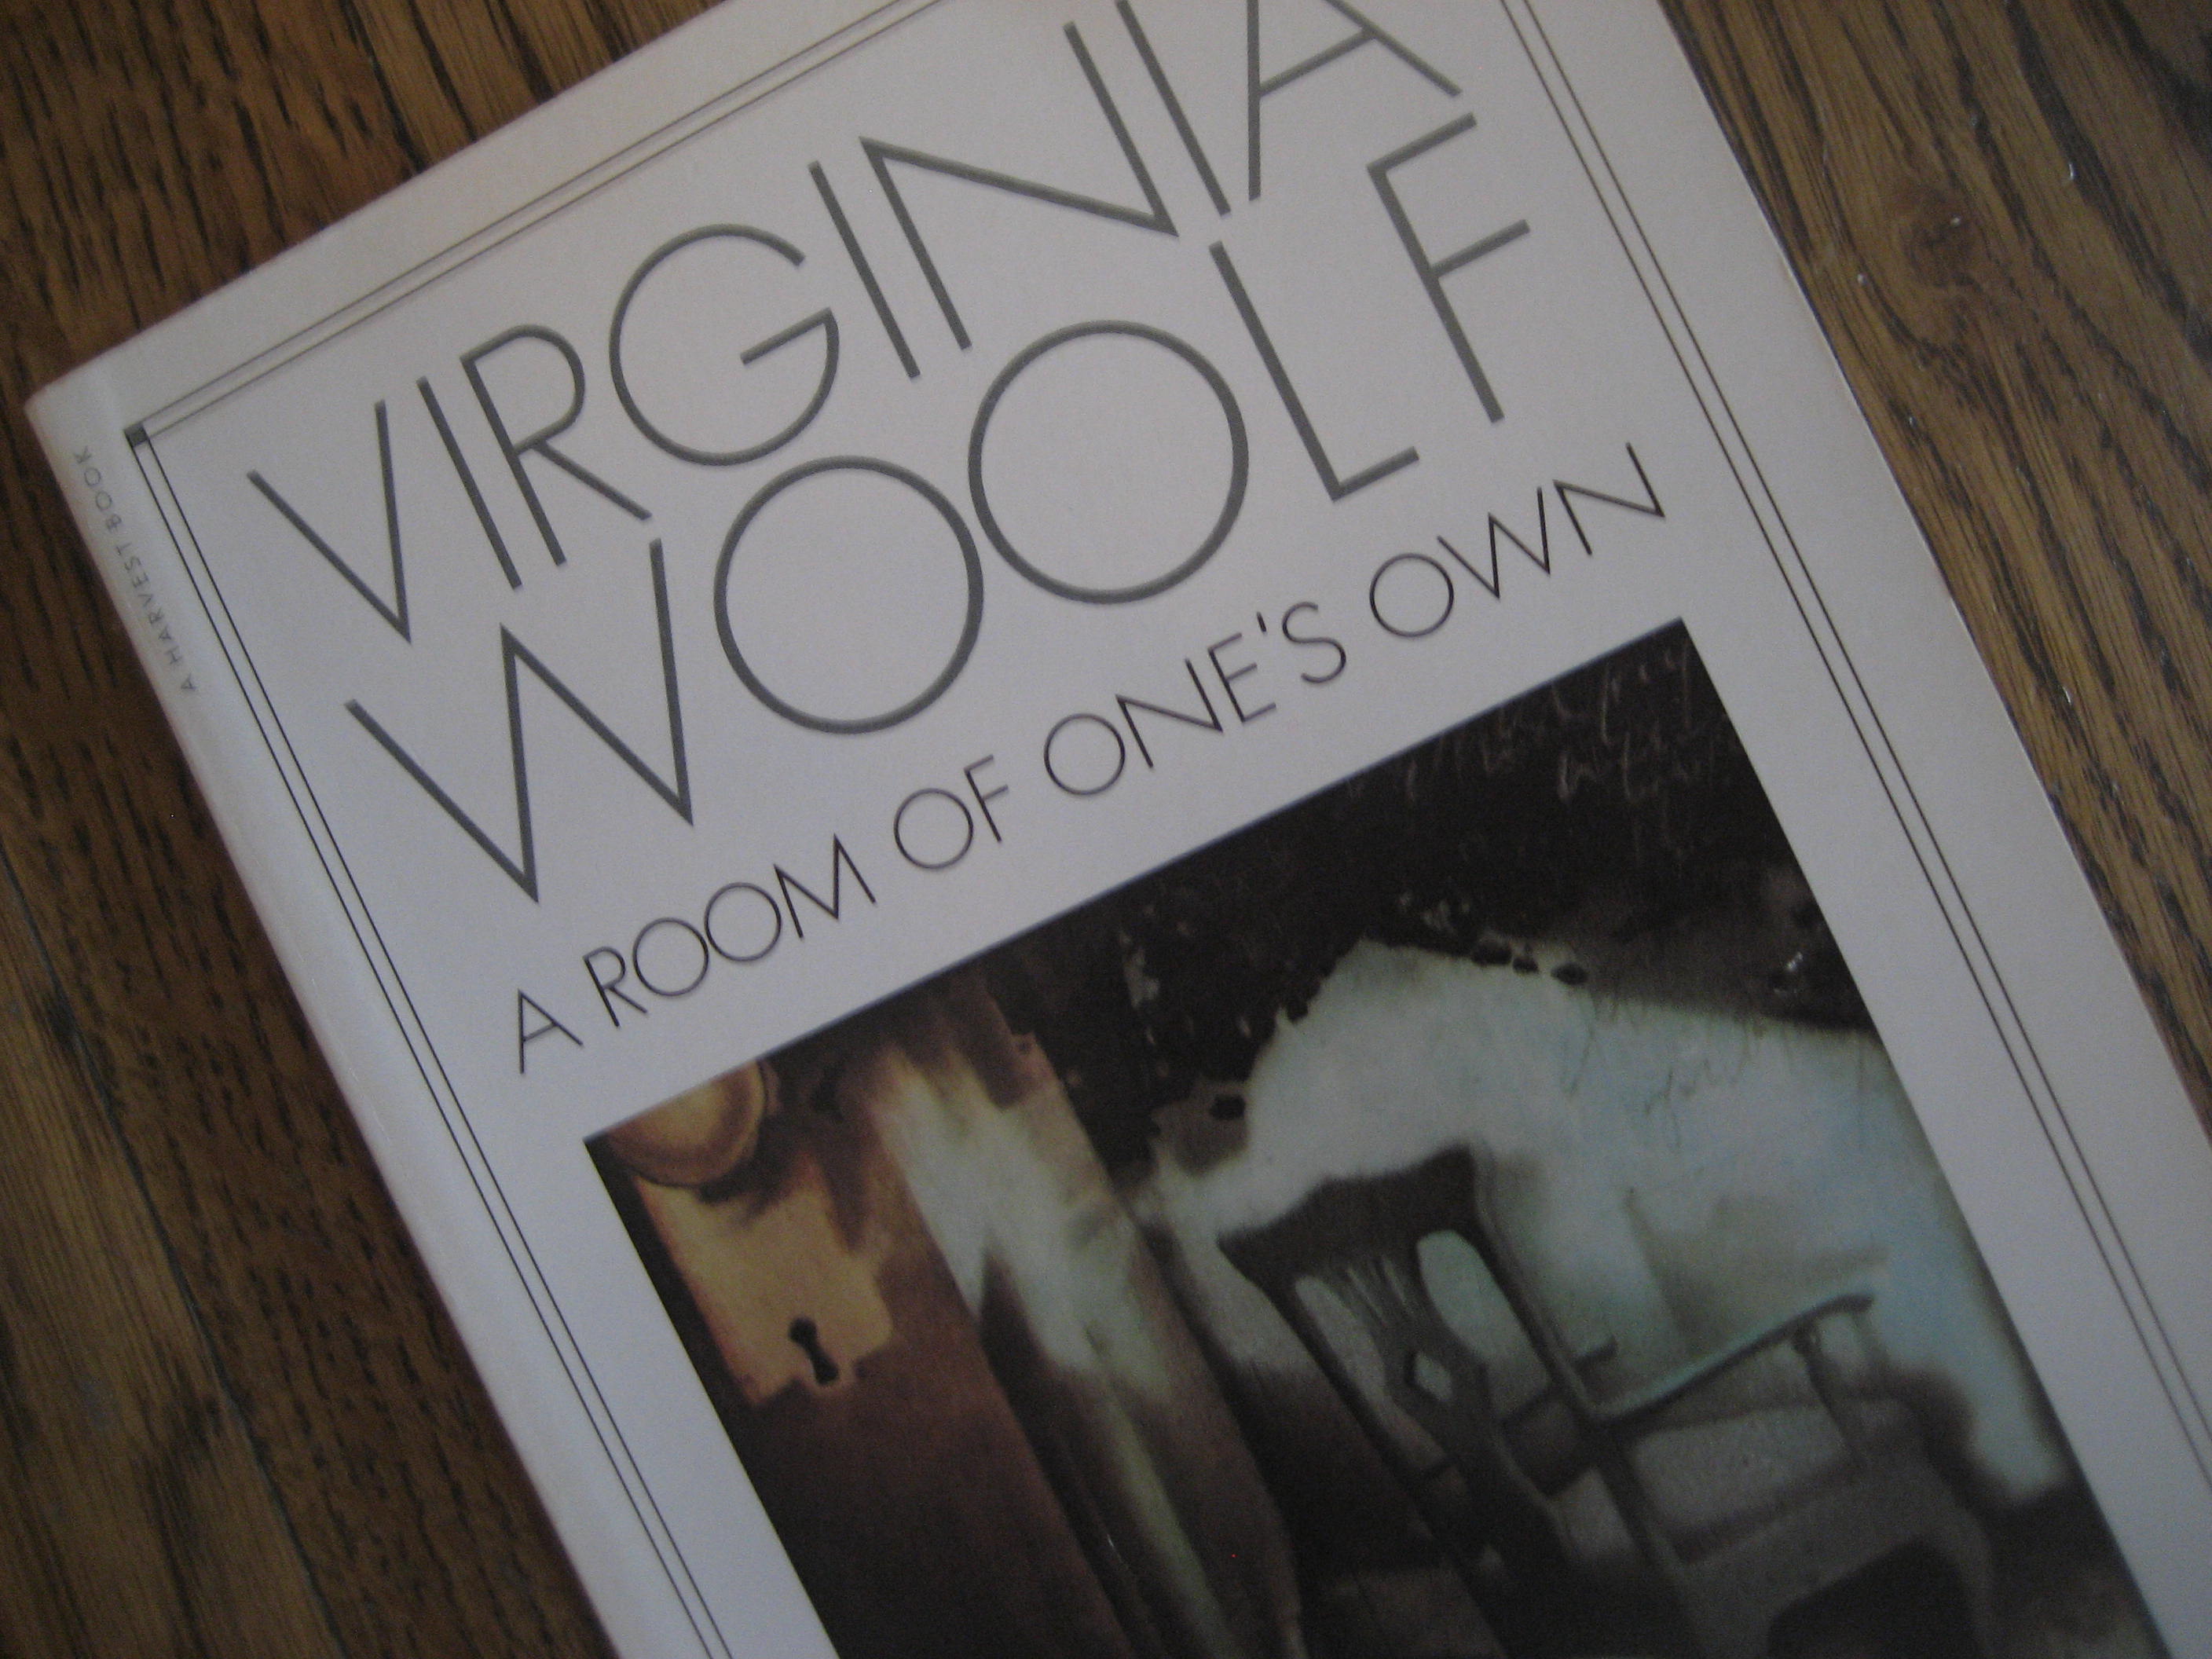 Virginia Woolf Room. A Room of one's own Вирджиния Вулф книга. A Room of one's own.